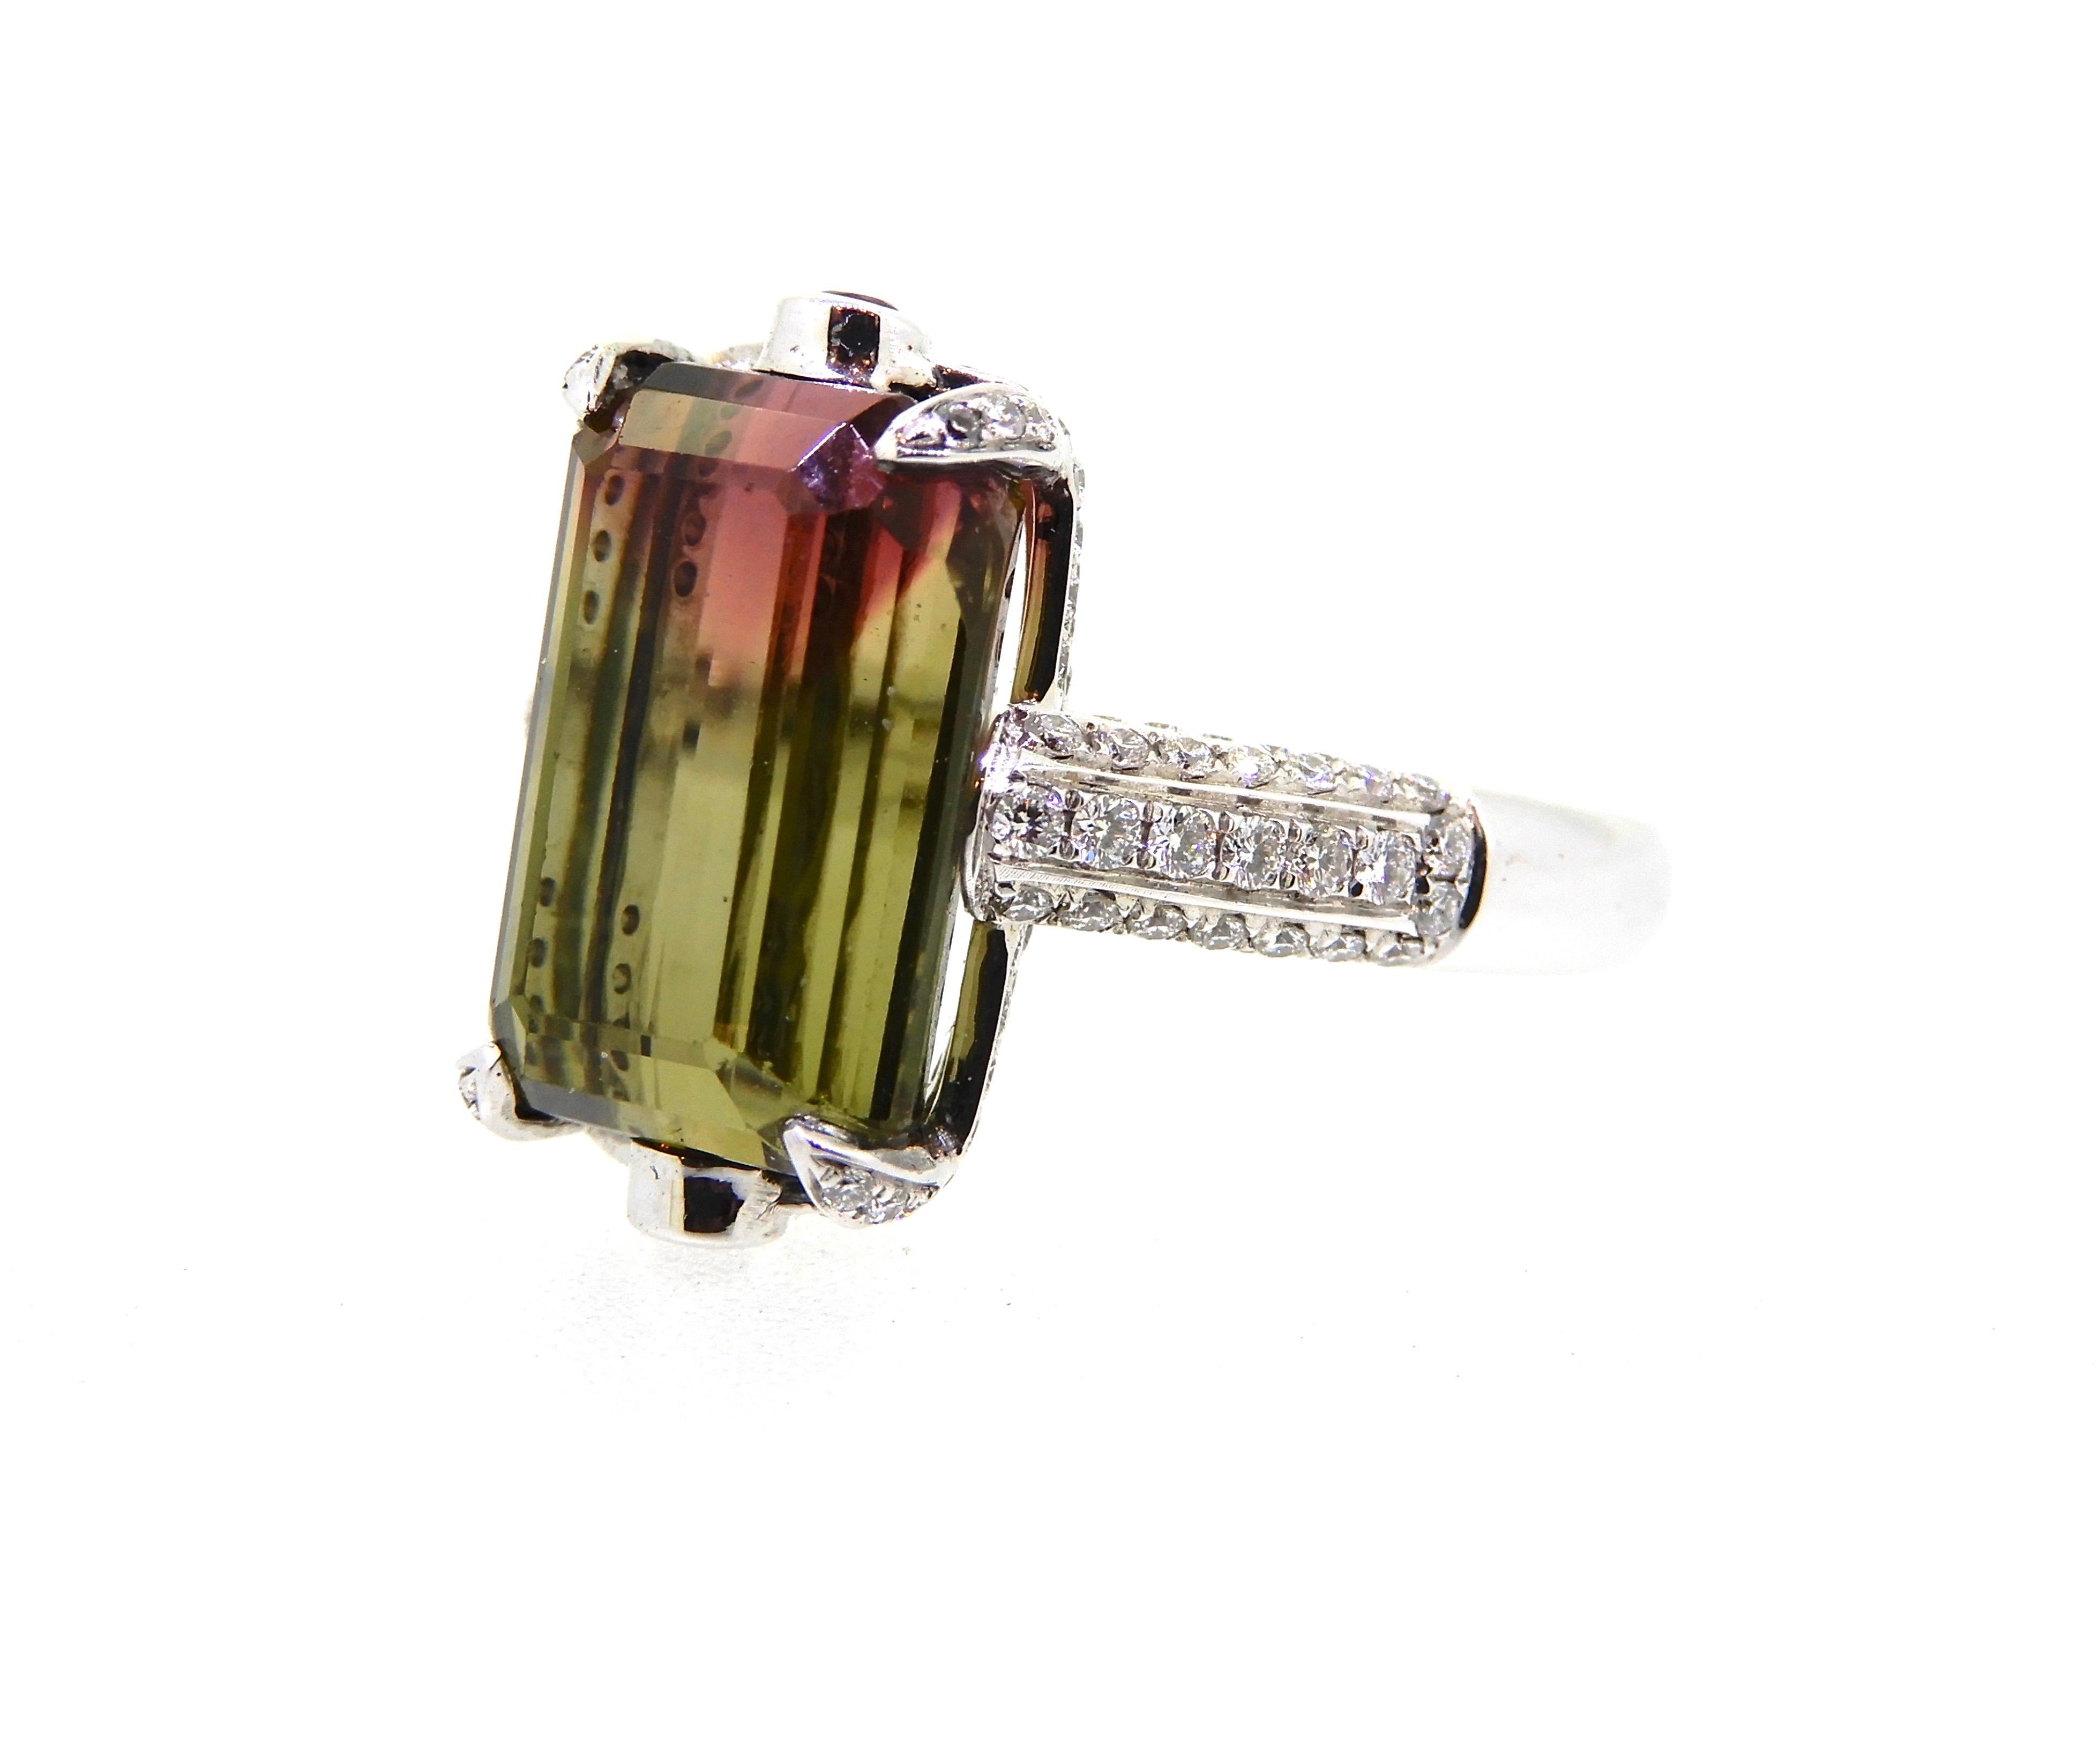 Standing out from the rest is this 7.53 Carat Modified Emerald Cut Bi Colour Tourmaline and Diamond Cocktail Ring. It has a lovely rounded, flat edge band, which splits into a split under-rail, each with one row of five micro claw set round